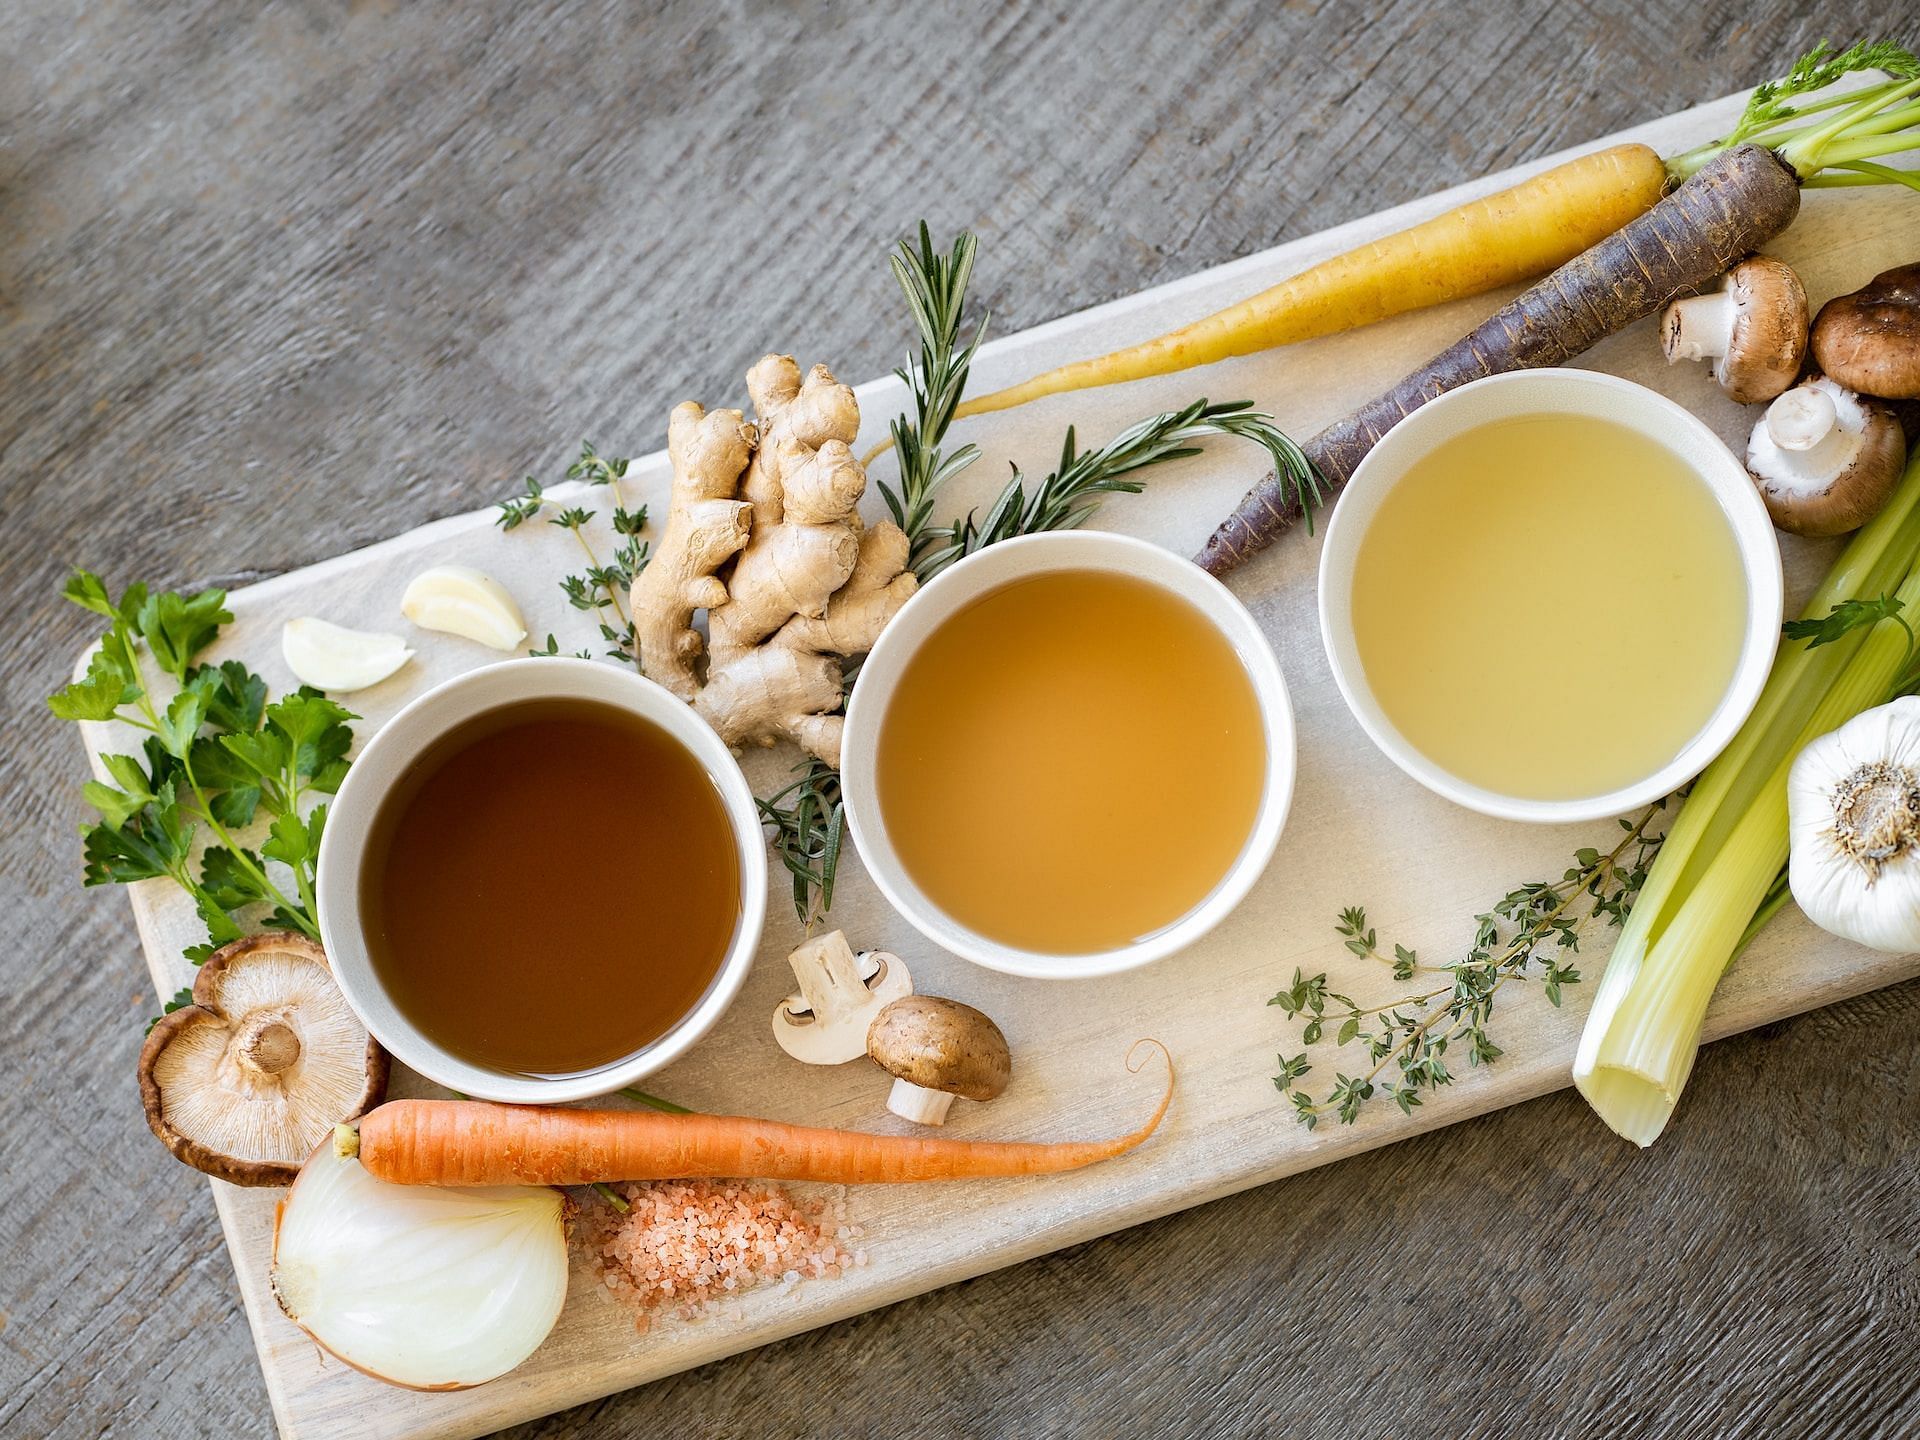 Bone broth is among the healthiest drinks to boost the immune system. (Image via Unsplash/Bluebird Provisions)